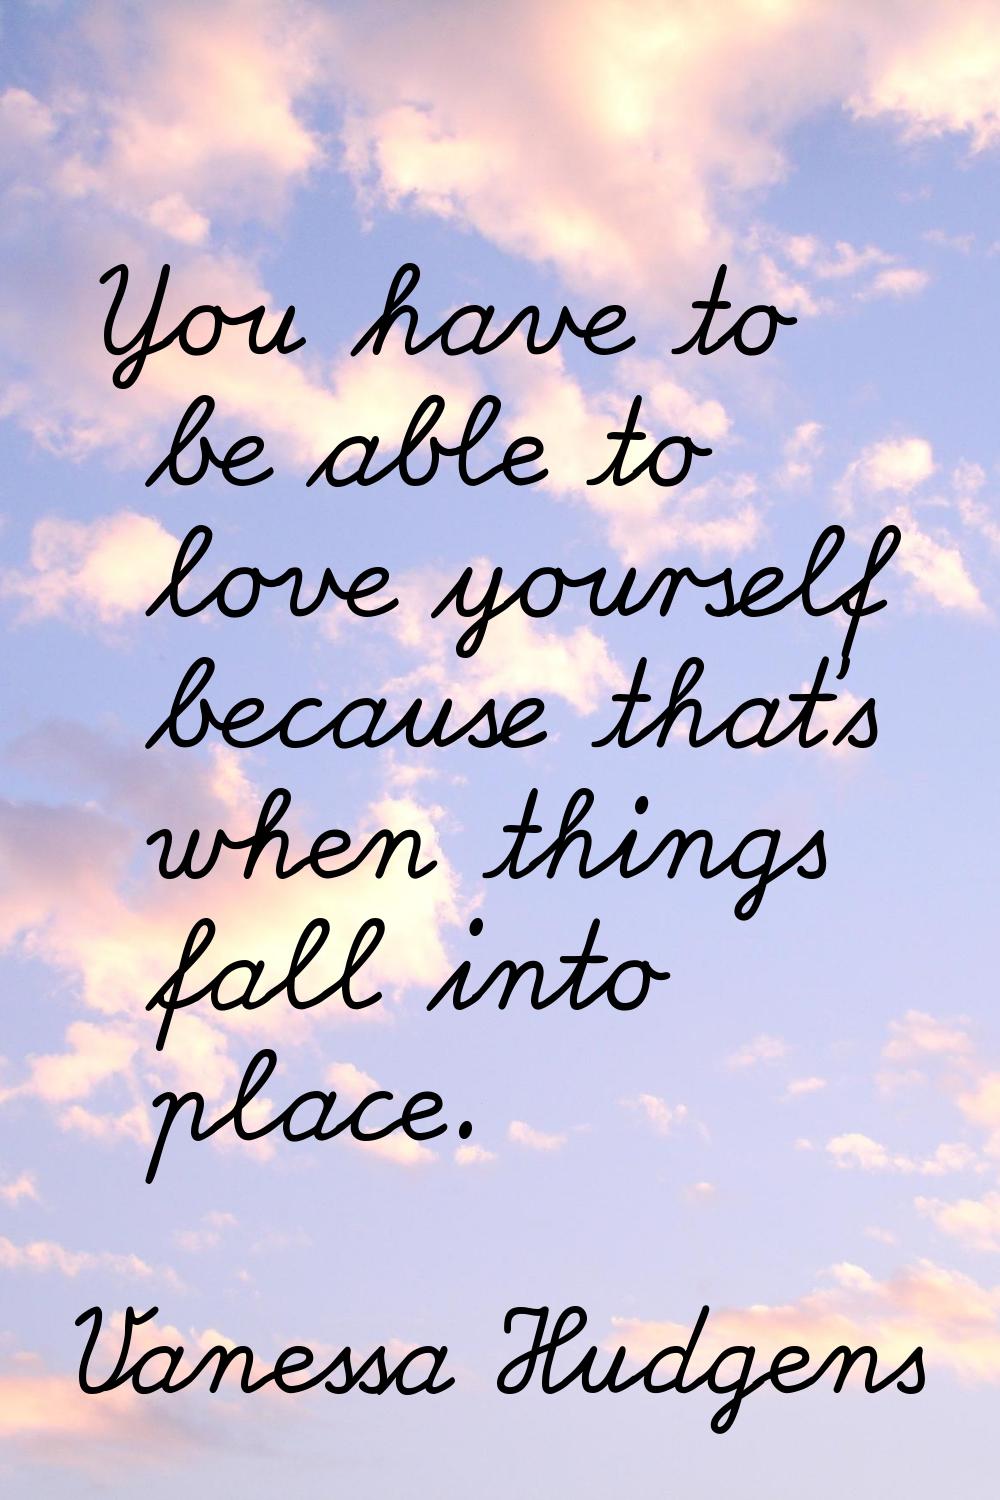 You have to be able to love yourself because that's when things fall into place.